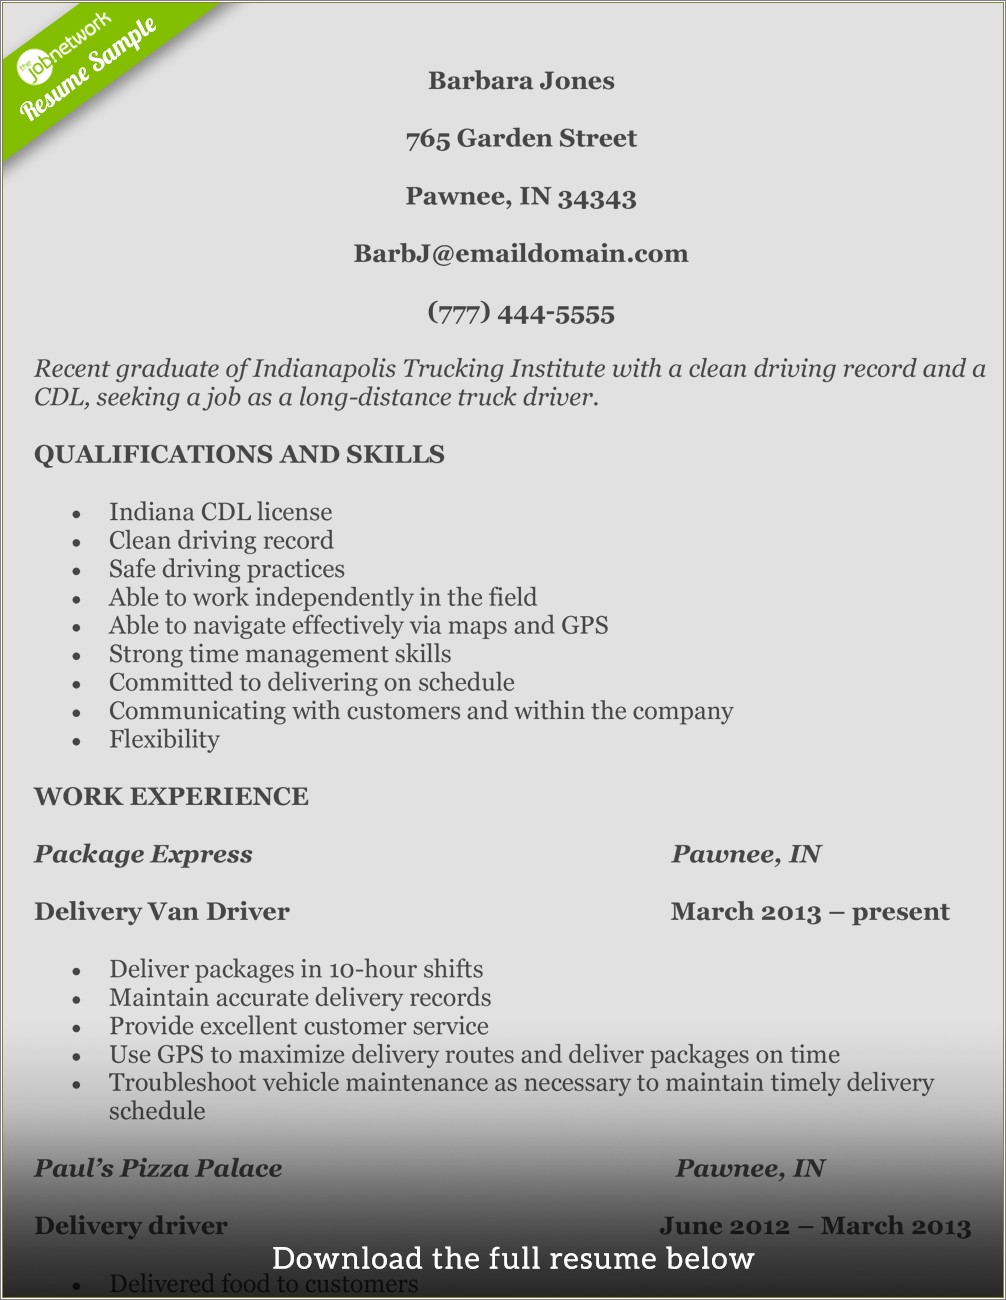 Resume Objective For New Truck Driver